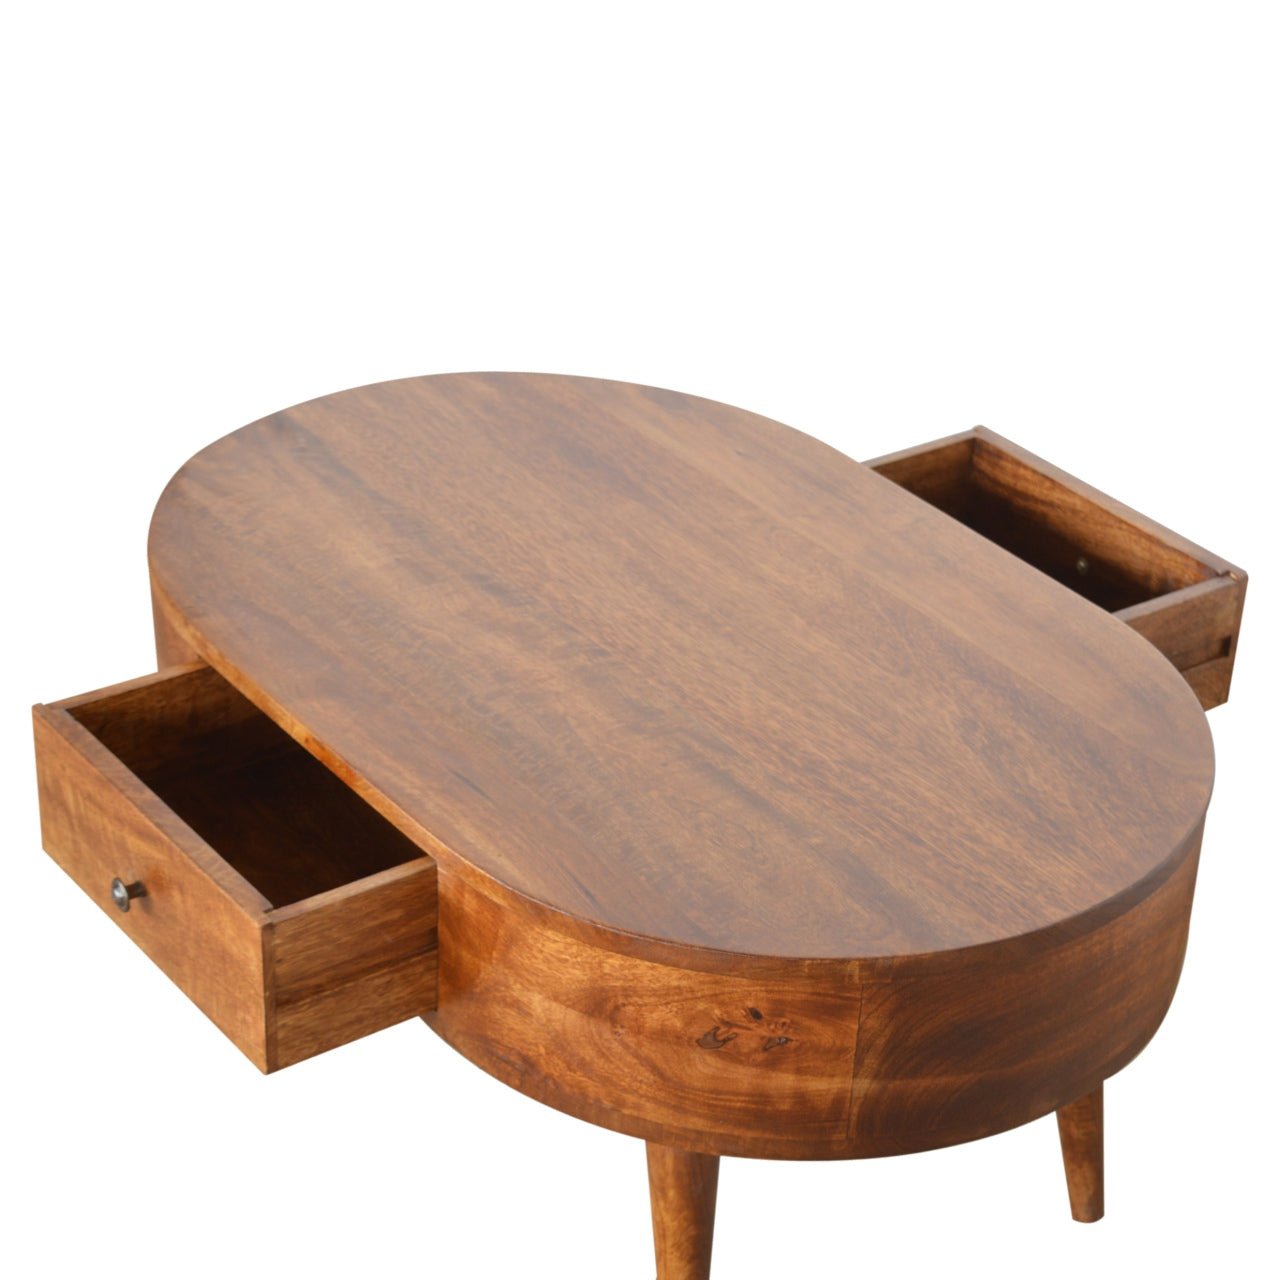 Solid Wood Chestnut Rounded Coffee Table with Drawer